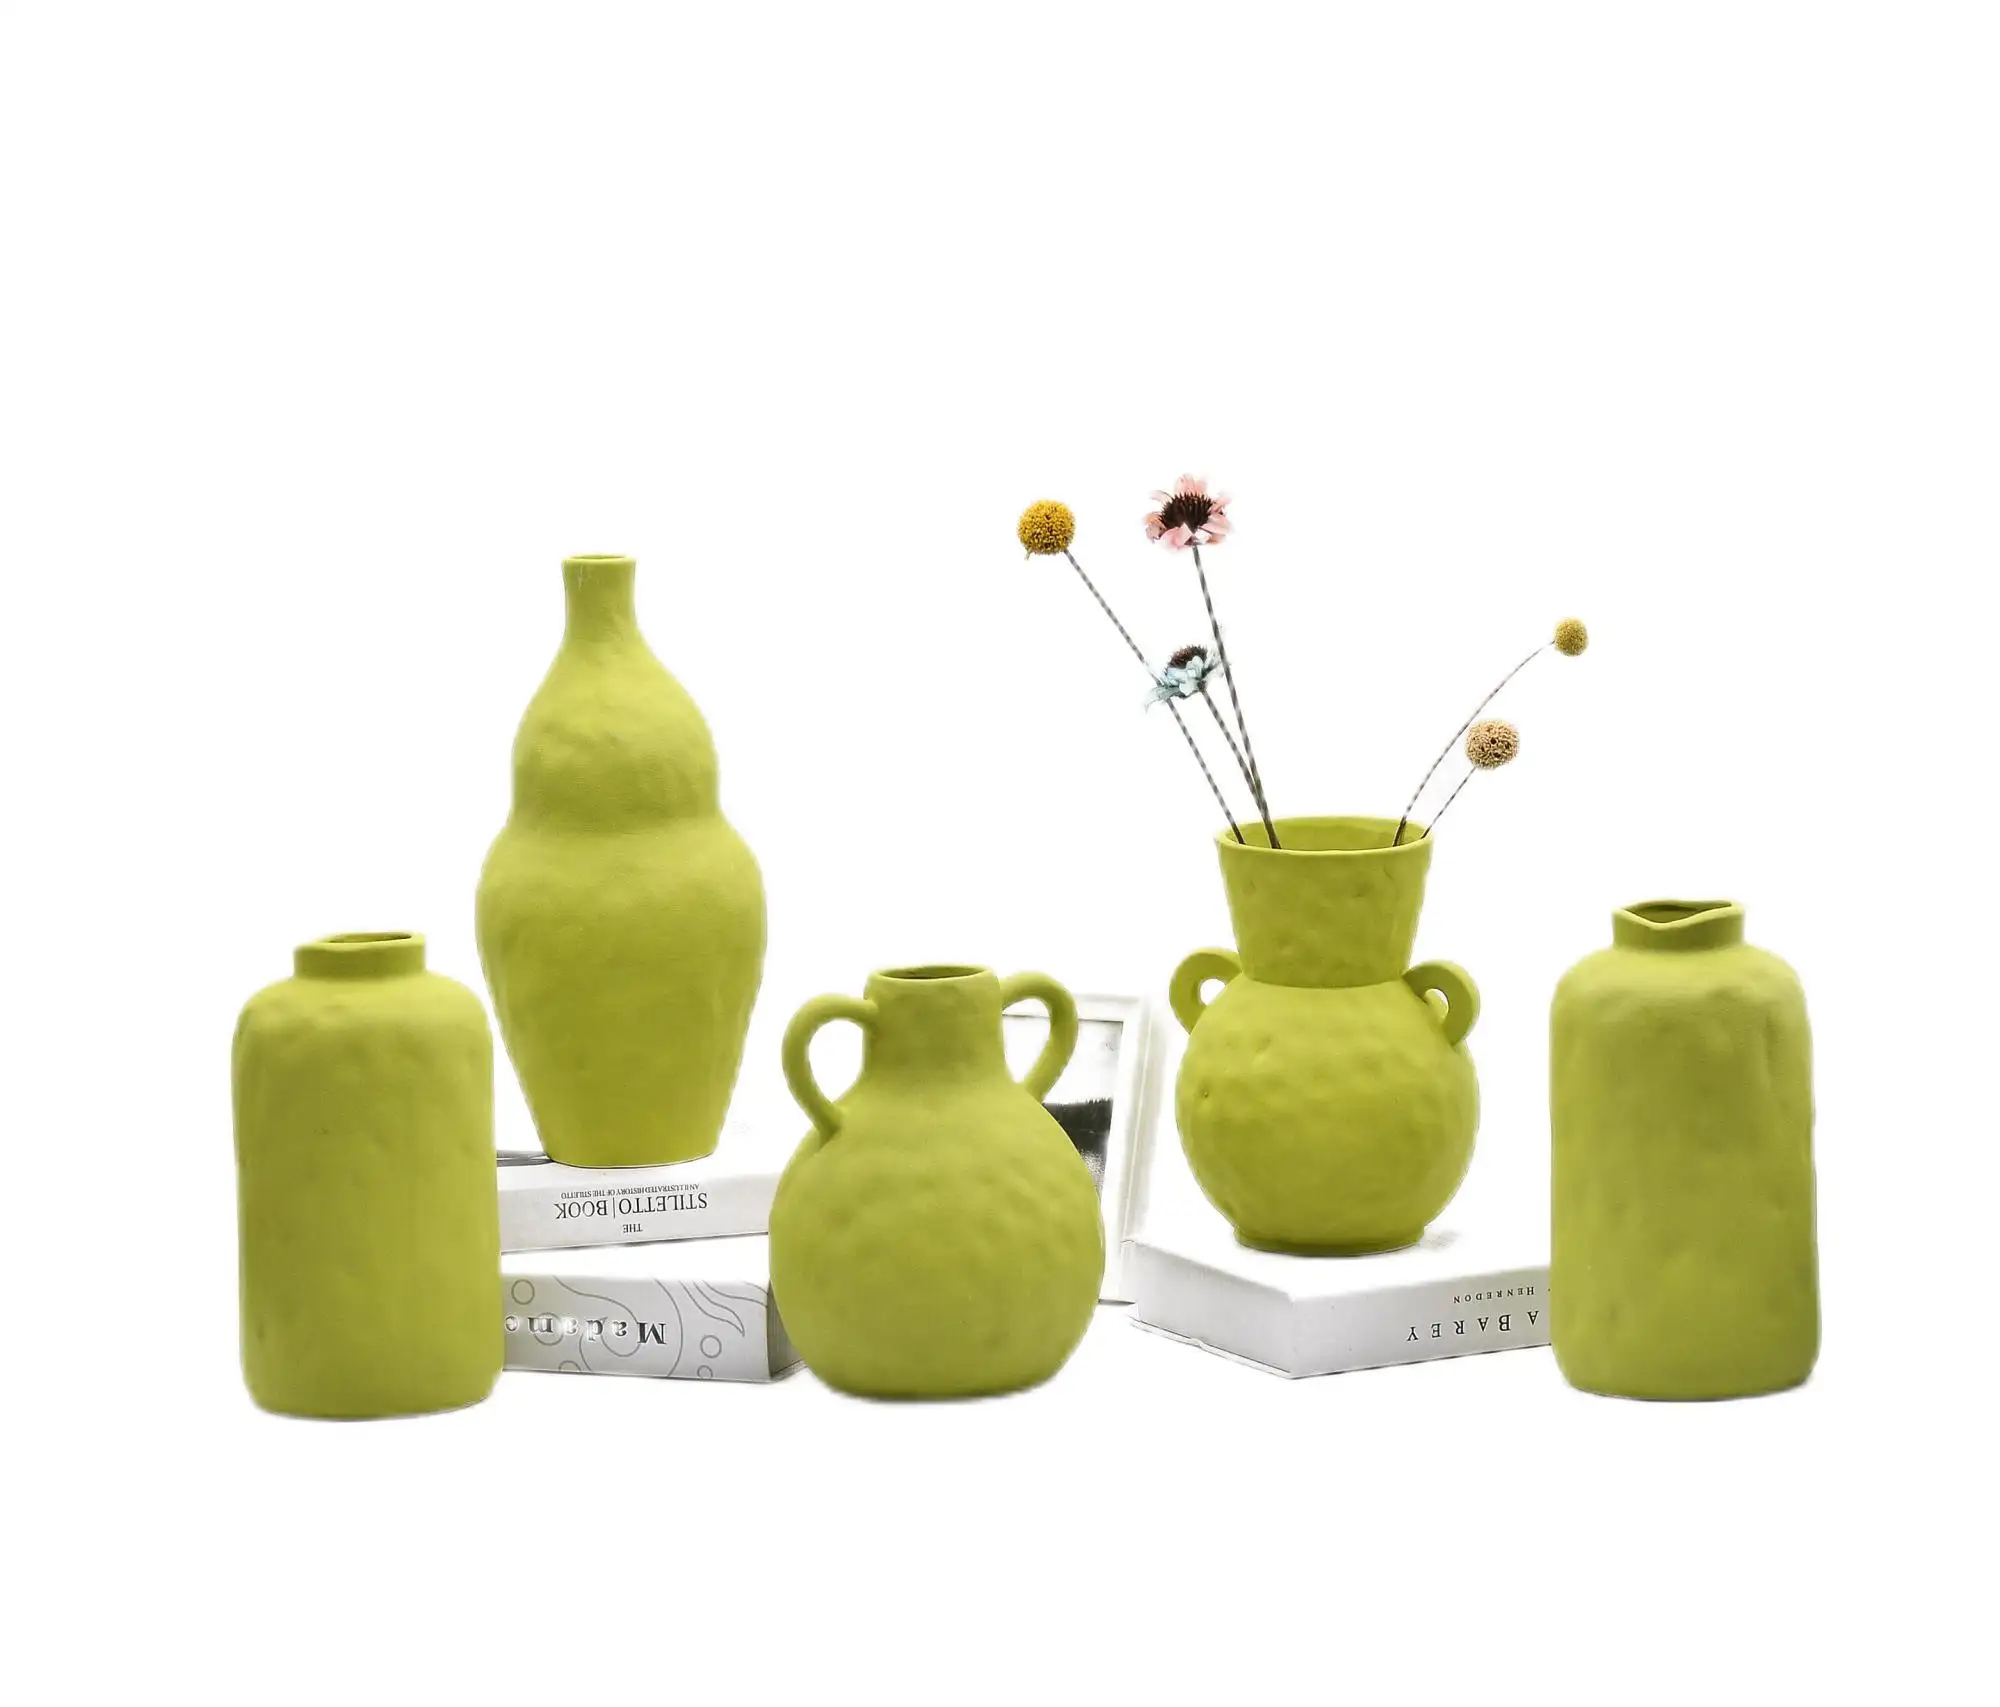 Factory new customized direct sales High quality green series ceramic vase Home Decoration Vase